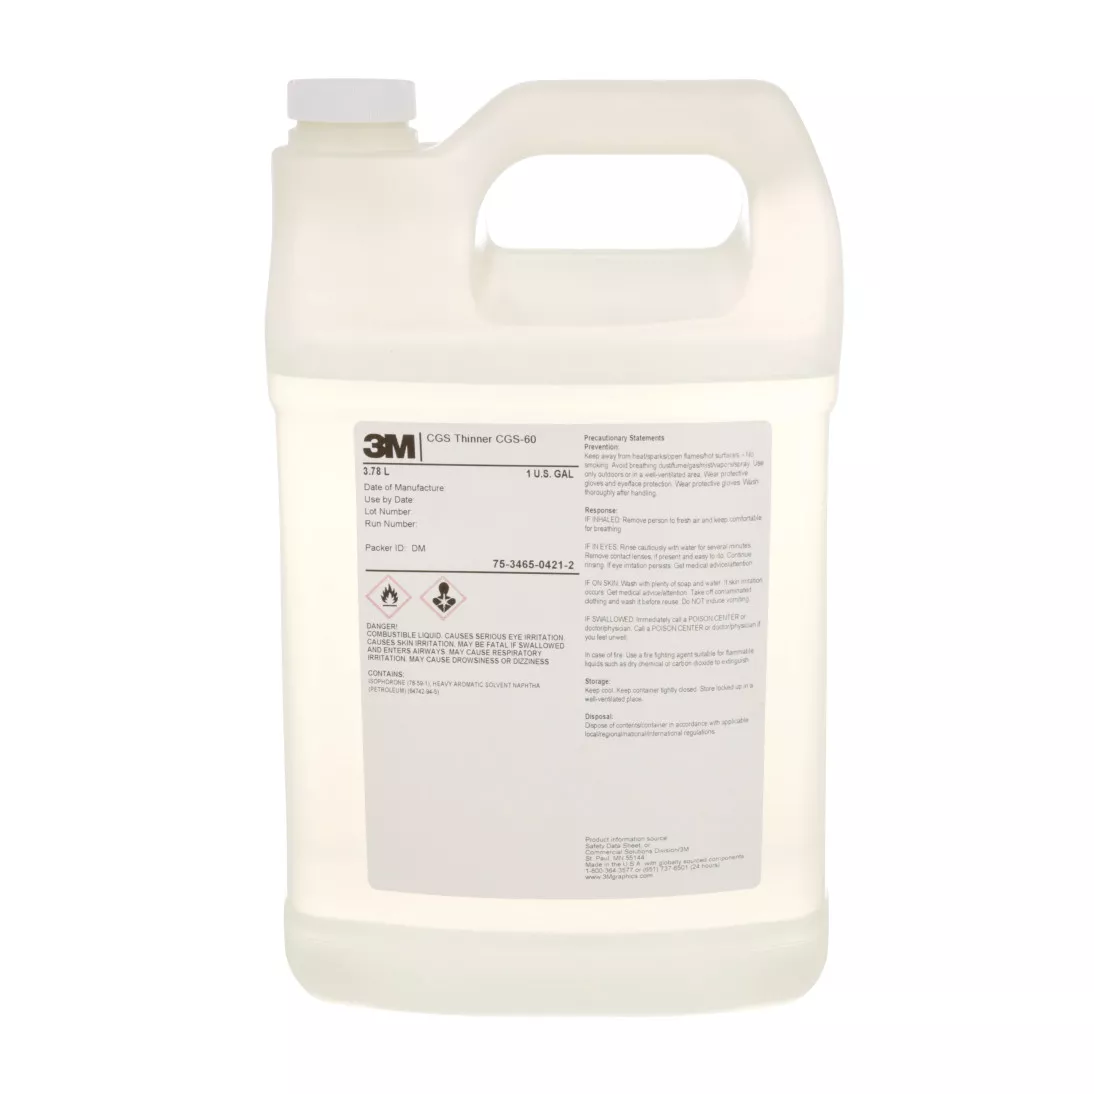 3M™ Thinner CGS-60, 1 Gallon Container